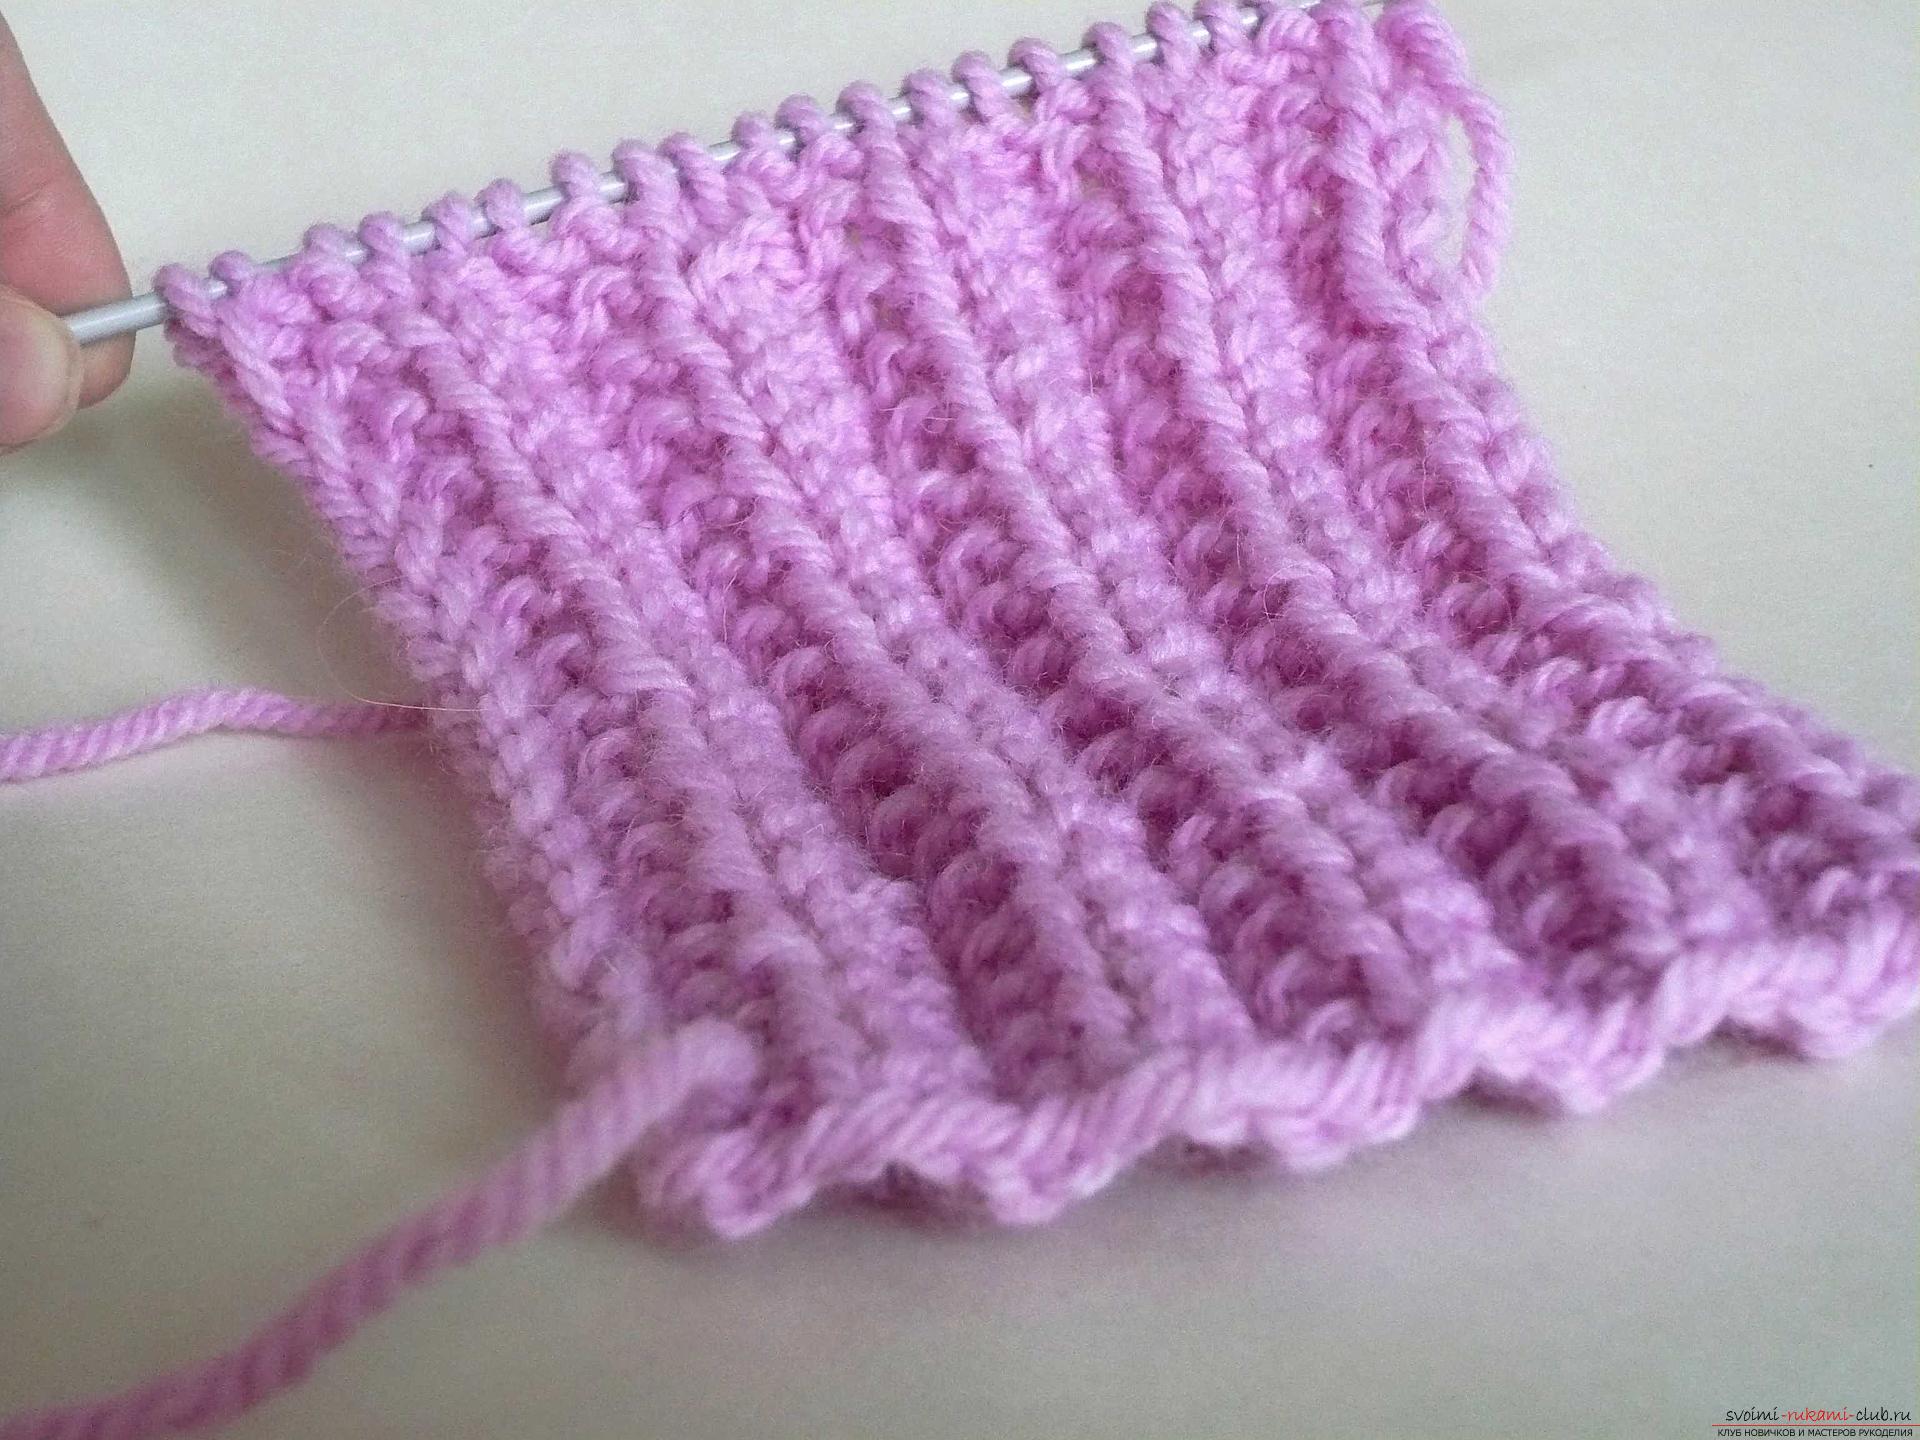 We learn to knit patterns for children with knitting needles. Photo №4